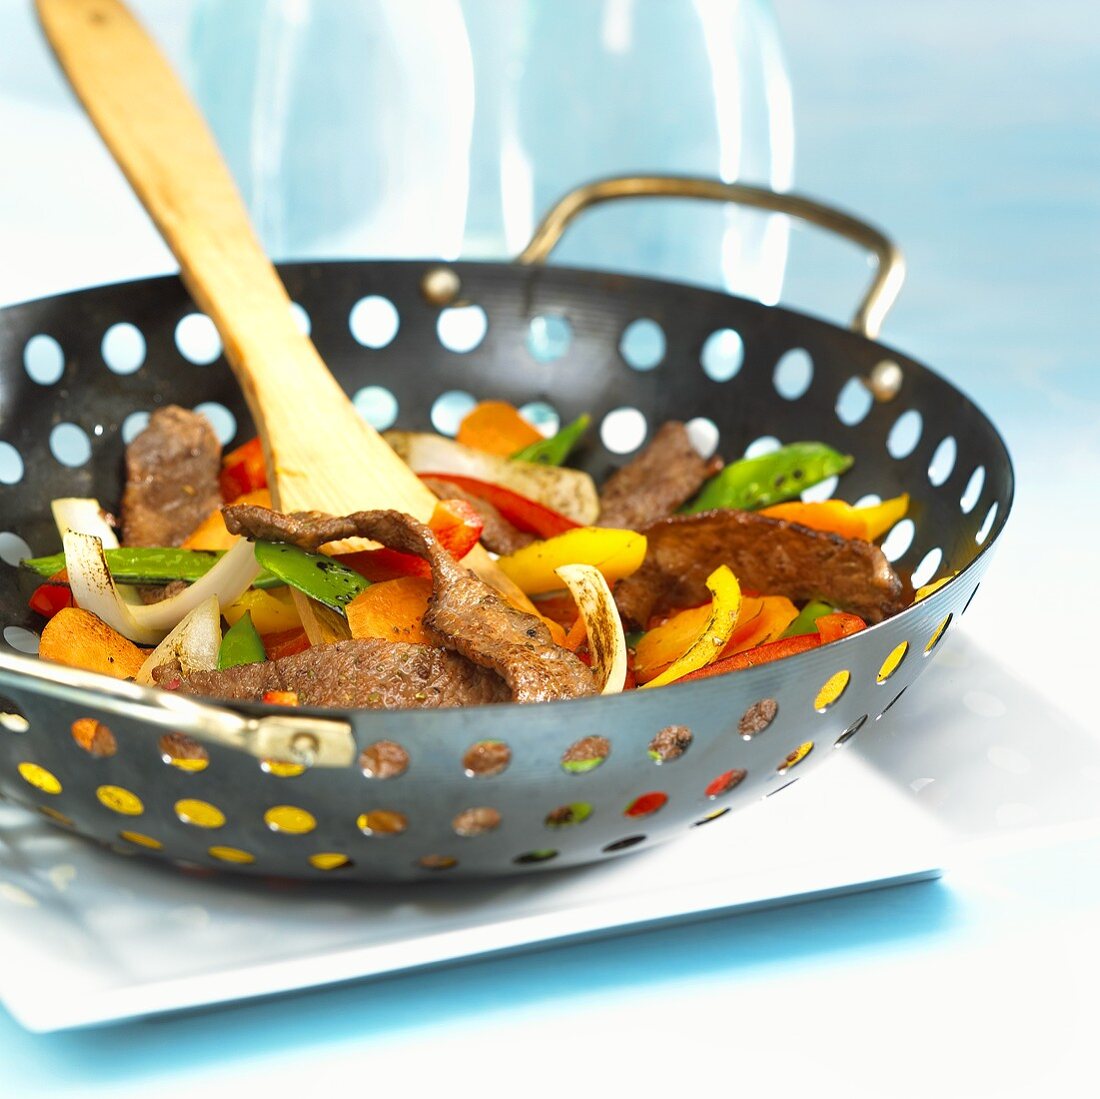 Pan-cooked beef and vegetable dish